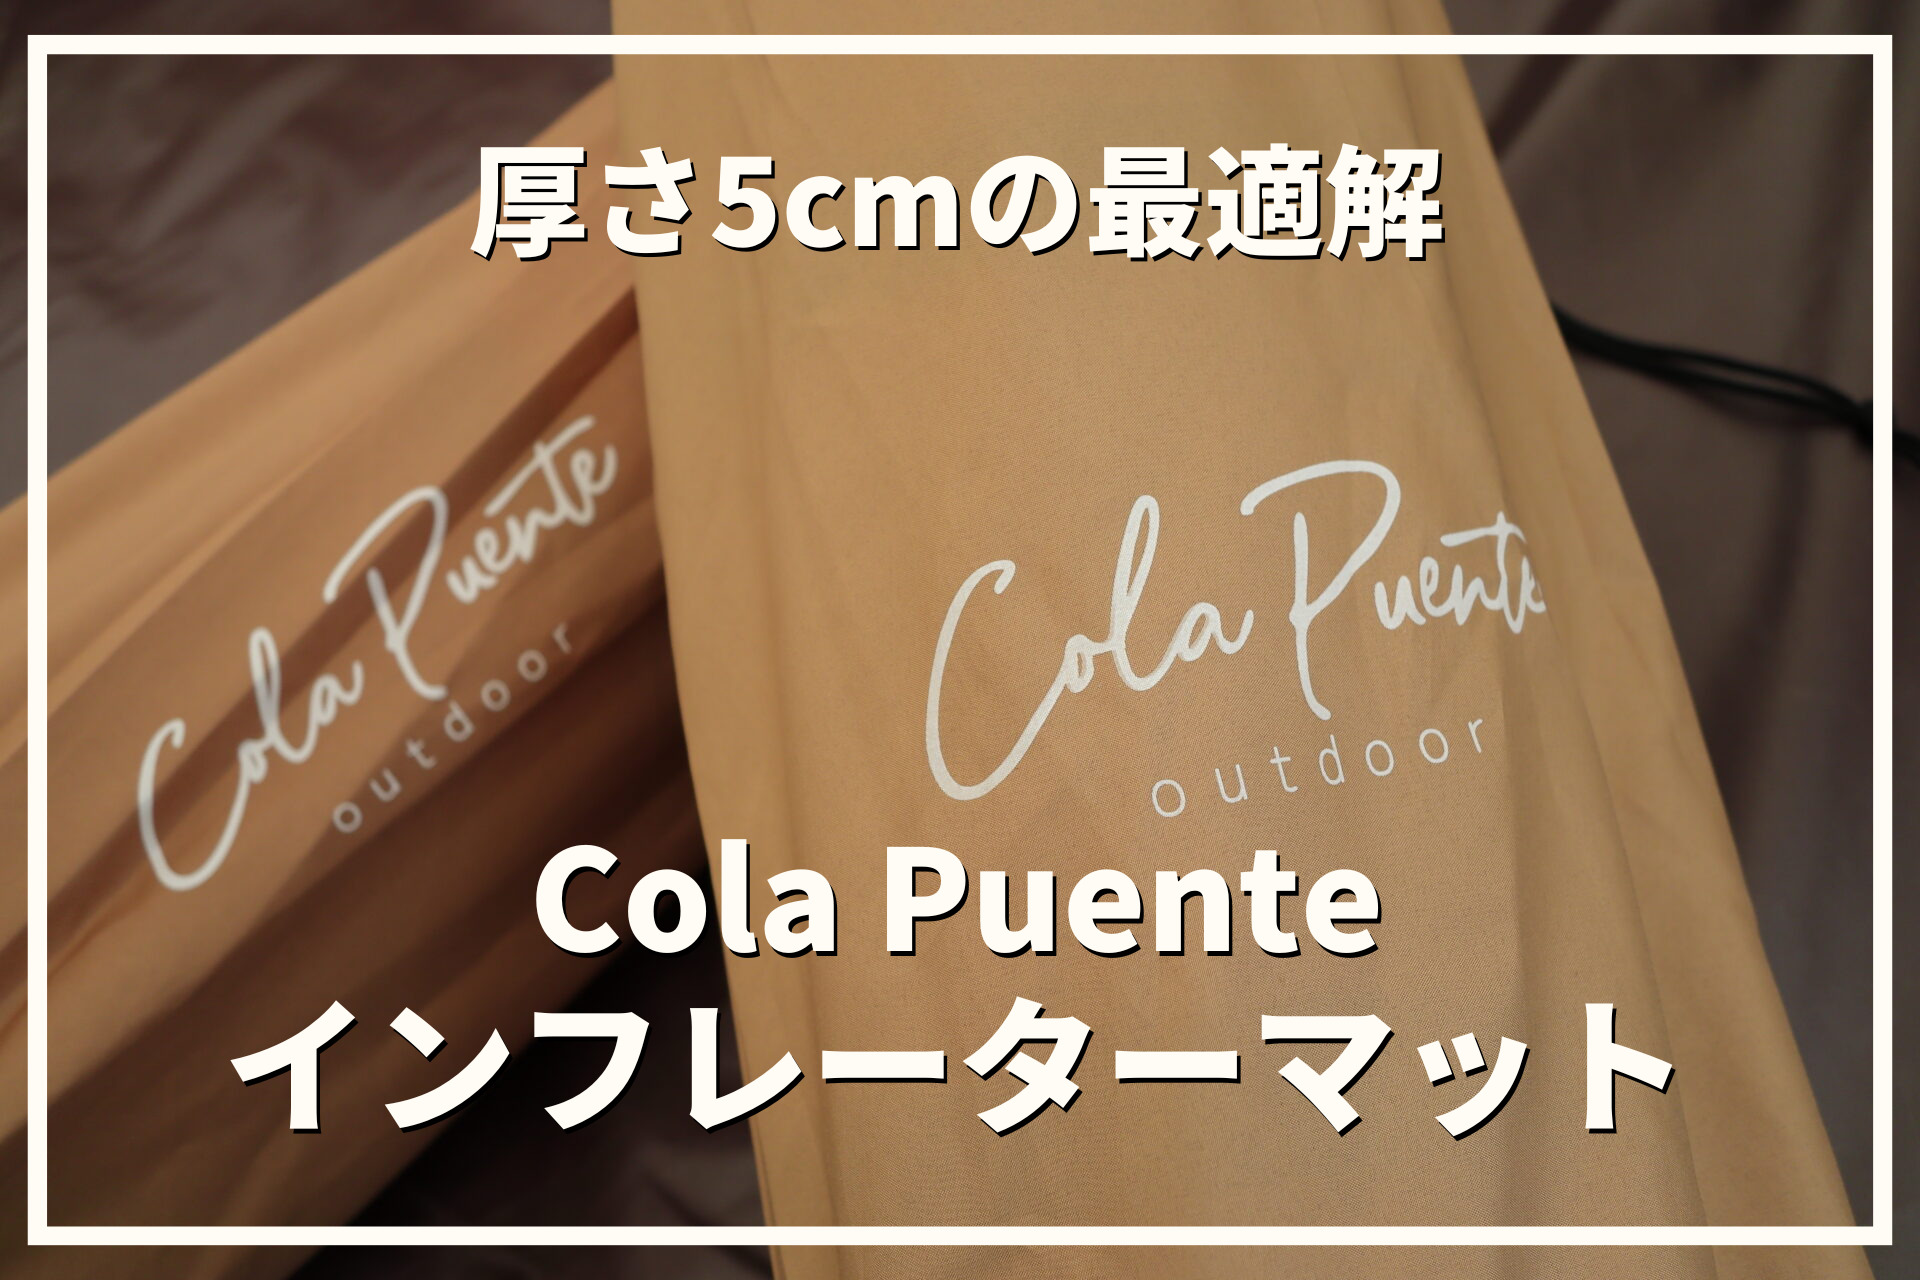 Cola Puenteマット　サムネイル